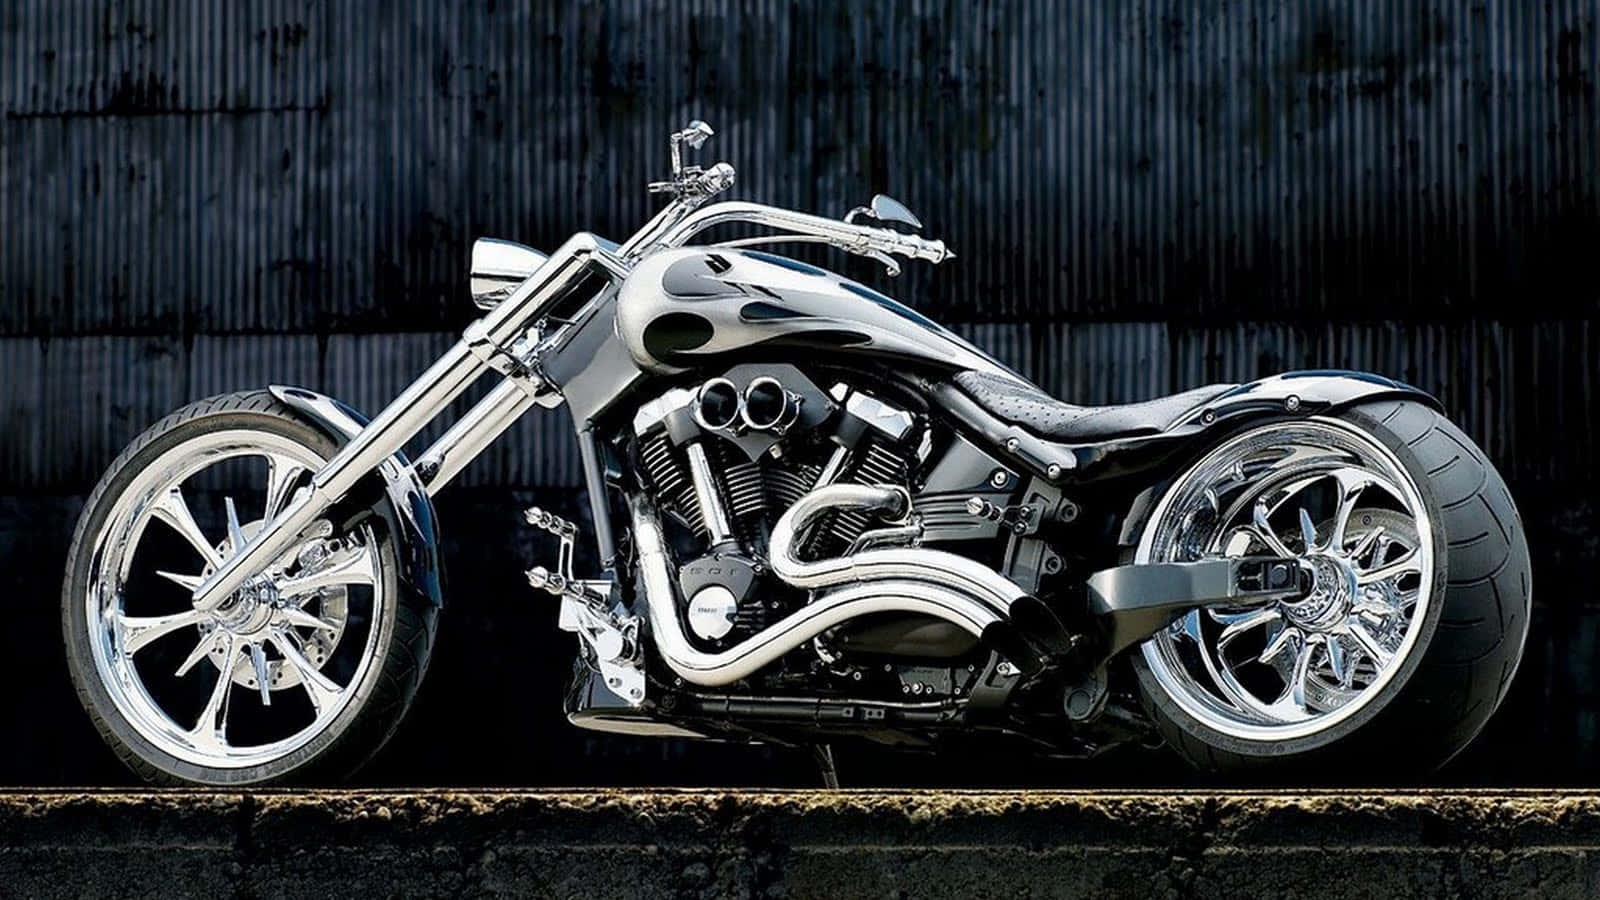 Enjoy an Exciting and Thrilling Ride on a Customized HD Motorcycle Wallpaper